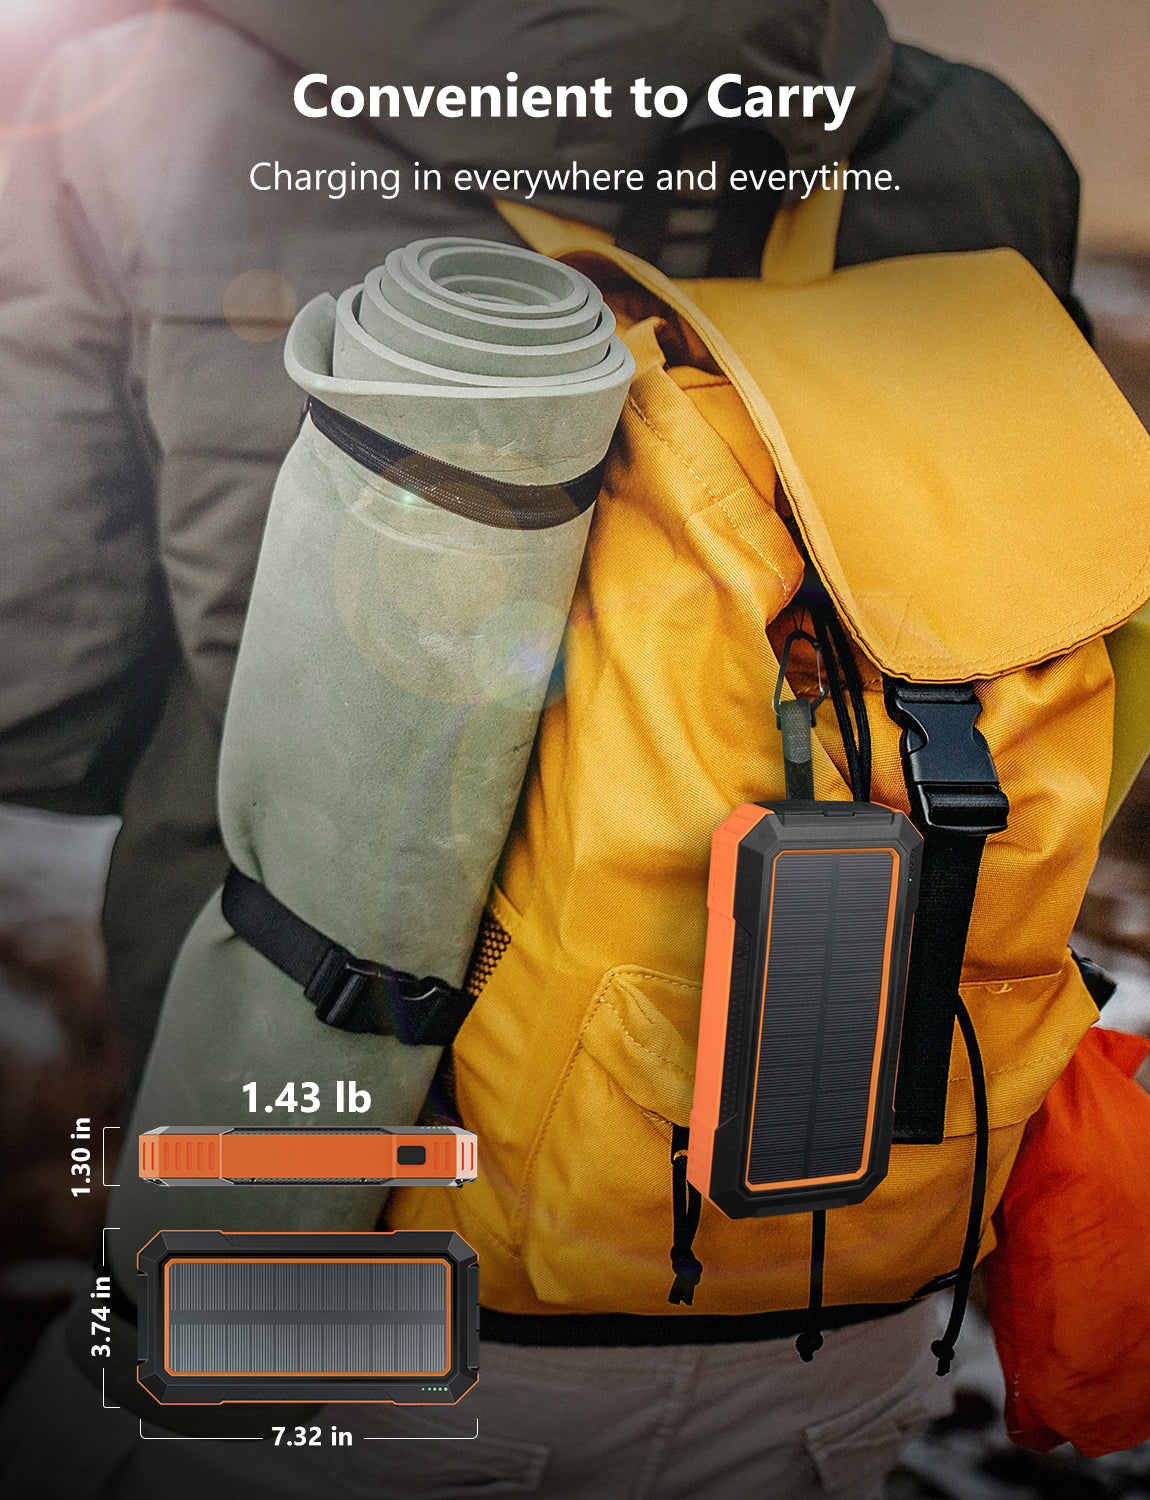 The power bank weighs 1.43 lbs, measures 7.32''  in length, and is 3.74'' in width—perfect for backpack hanging.